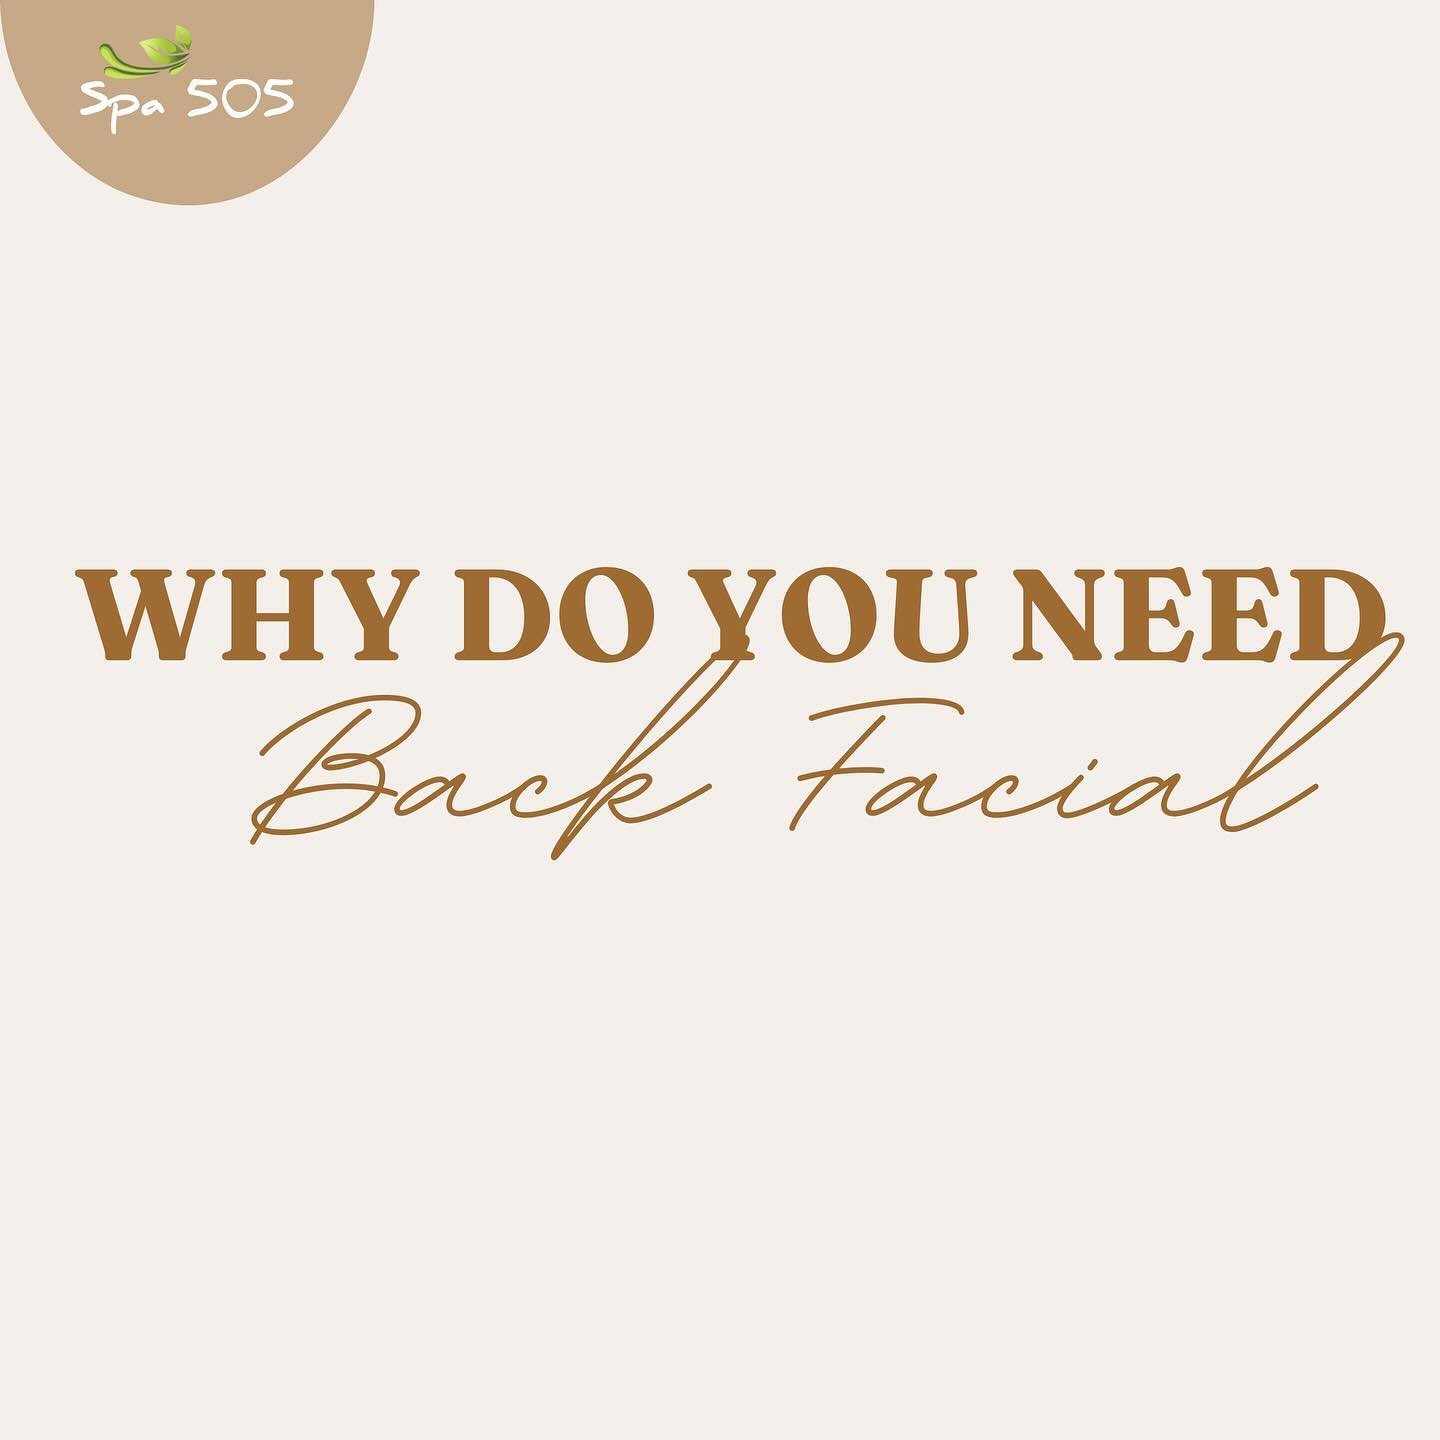 WHY DO YOU NEED BACK FACIAL?

🍃We received questions that why should they get a back facial? While a back facial might sound slightly silly, this spa treatment can actually be quite beneficial.

A back facial is a skin treatment which is formulated 